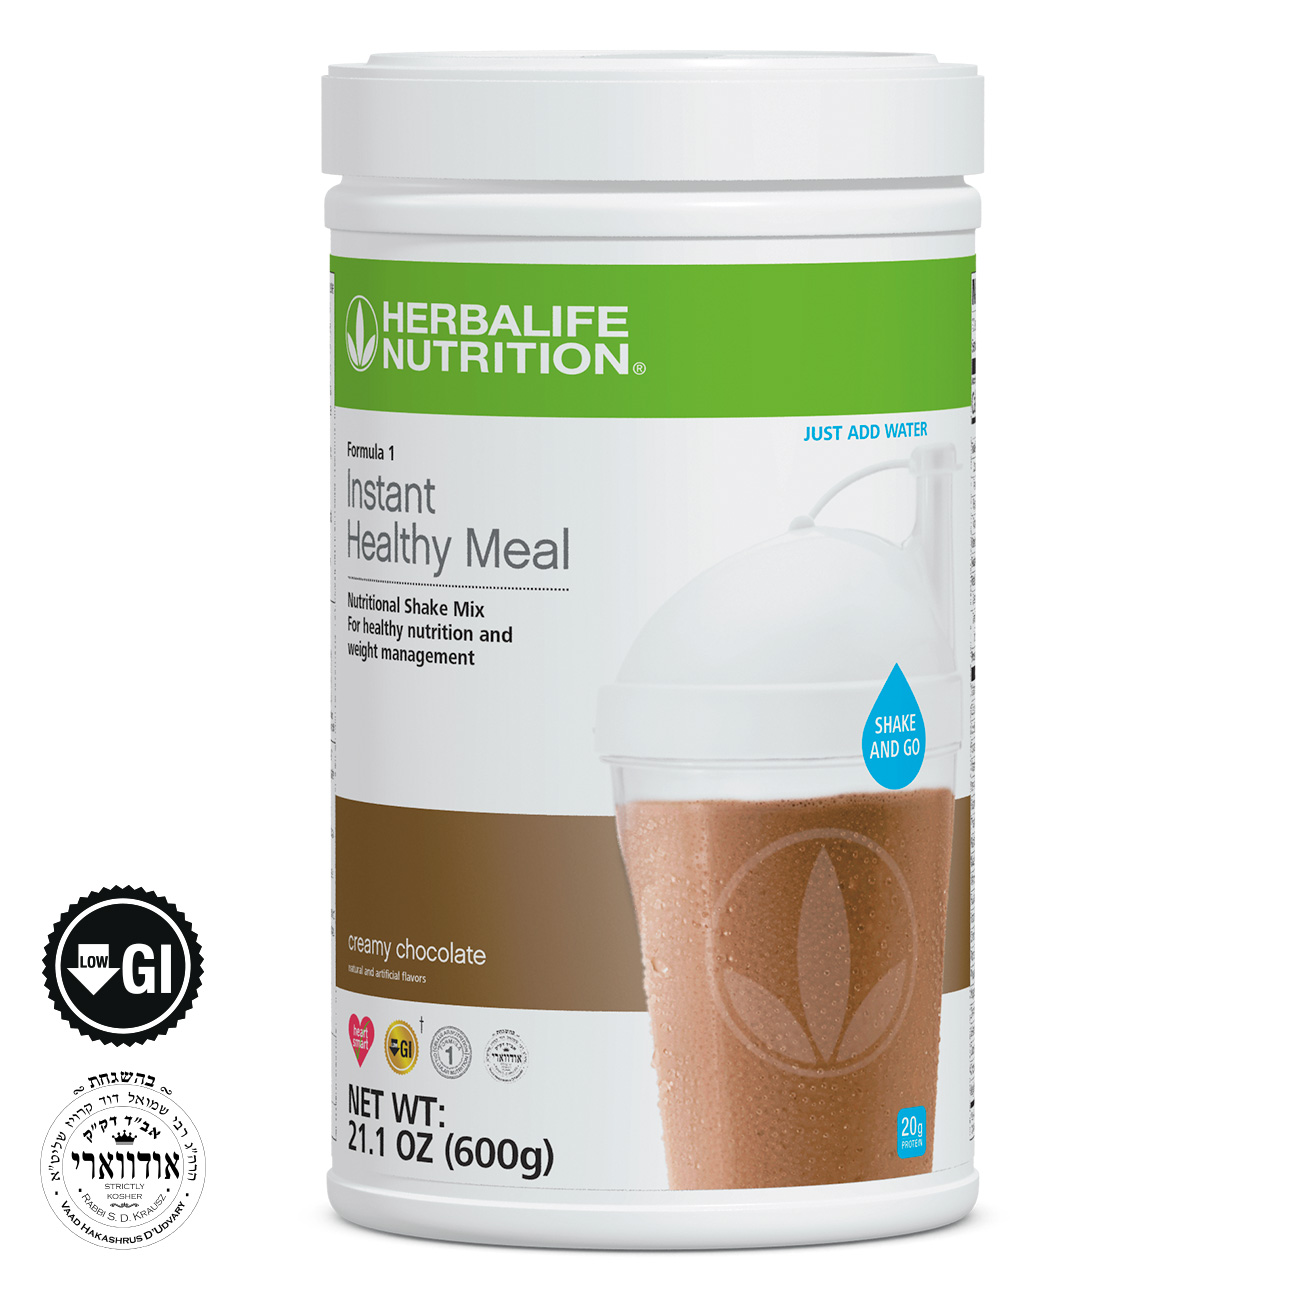   Formula 1 Instant Healthy Meal Nutritional Shake Mix: Creamy Chocolate